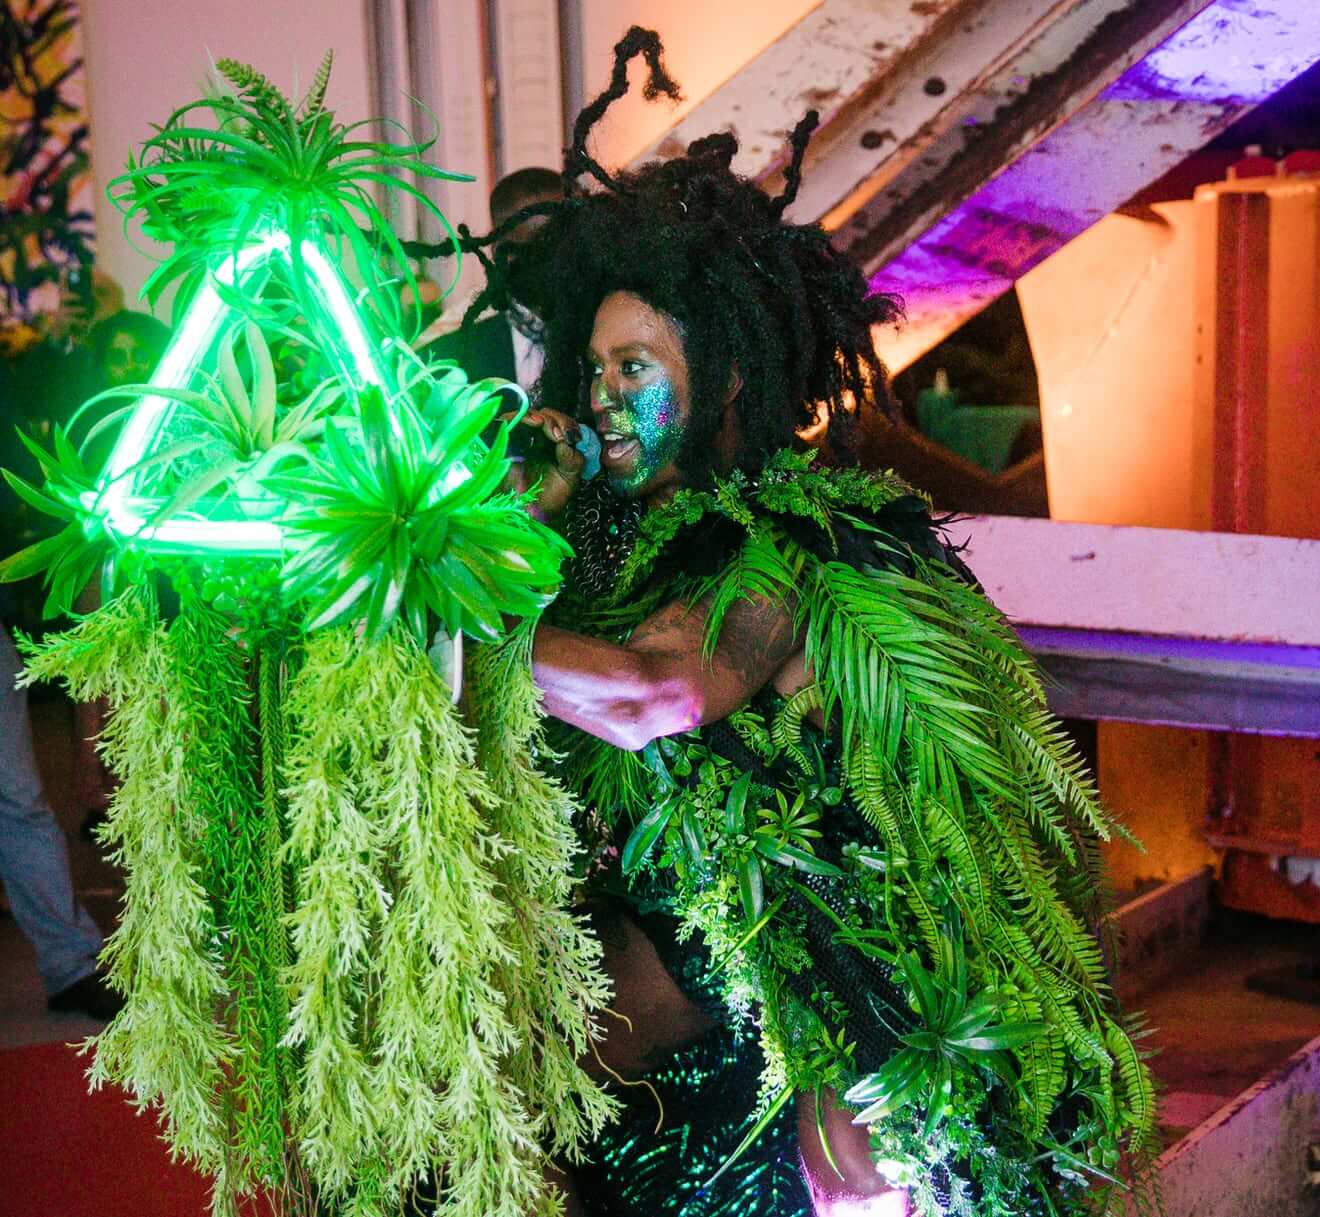 A brown-skinned gender nonconforming person holding a microphone sitting down. This person has black locs and blue and green sparkling makeup on their face, wearing black with green plants draped over their clothing. They are performing in front of a neon green triangle with green flowers and plant vines hanging from it.